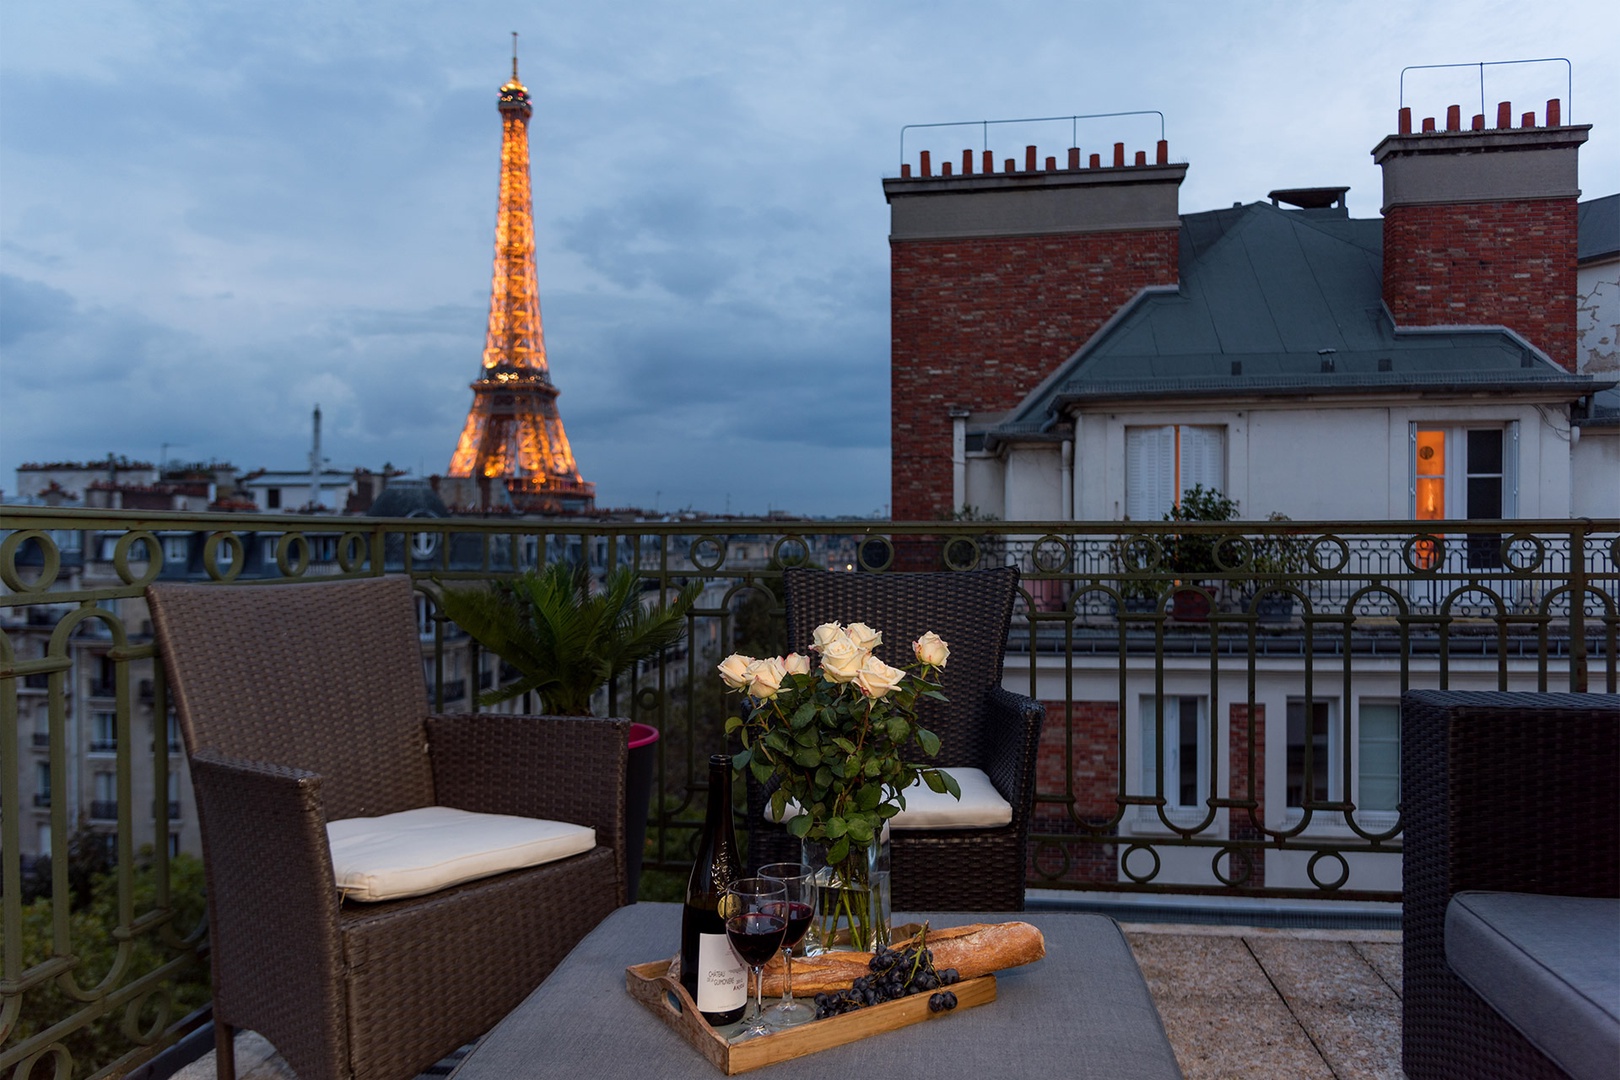 Enjoy amazing Eiffel Tower views right from your terrace.